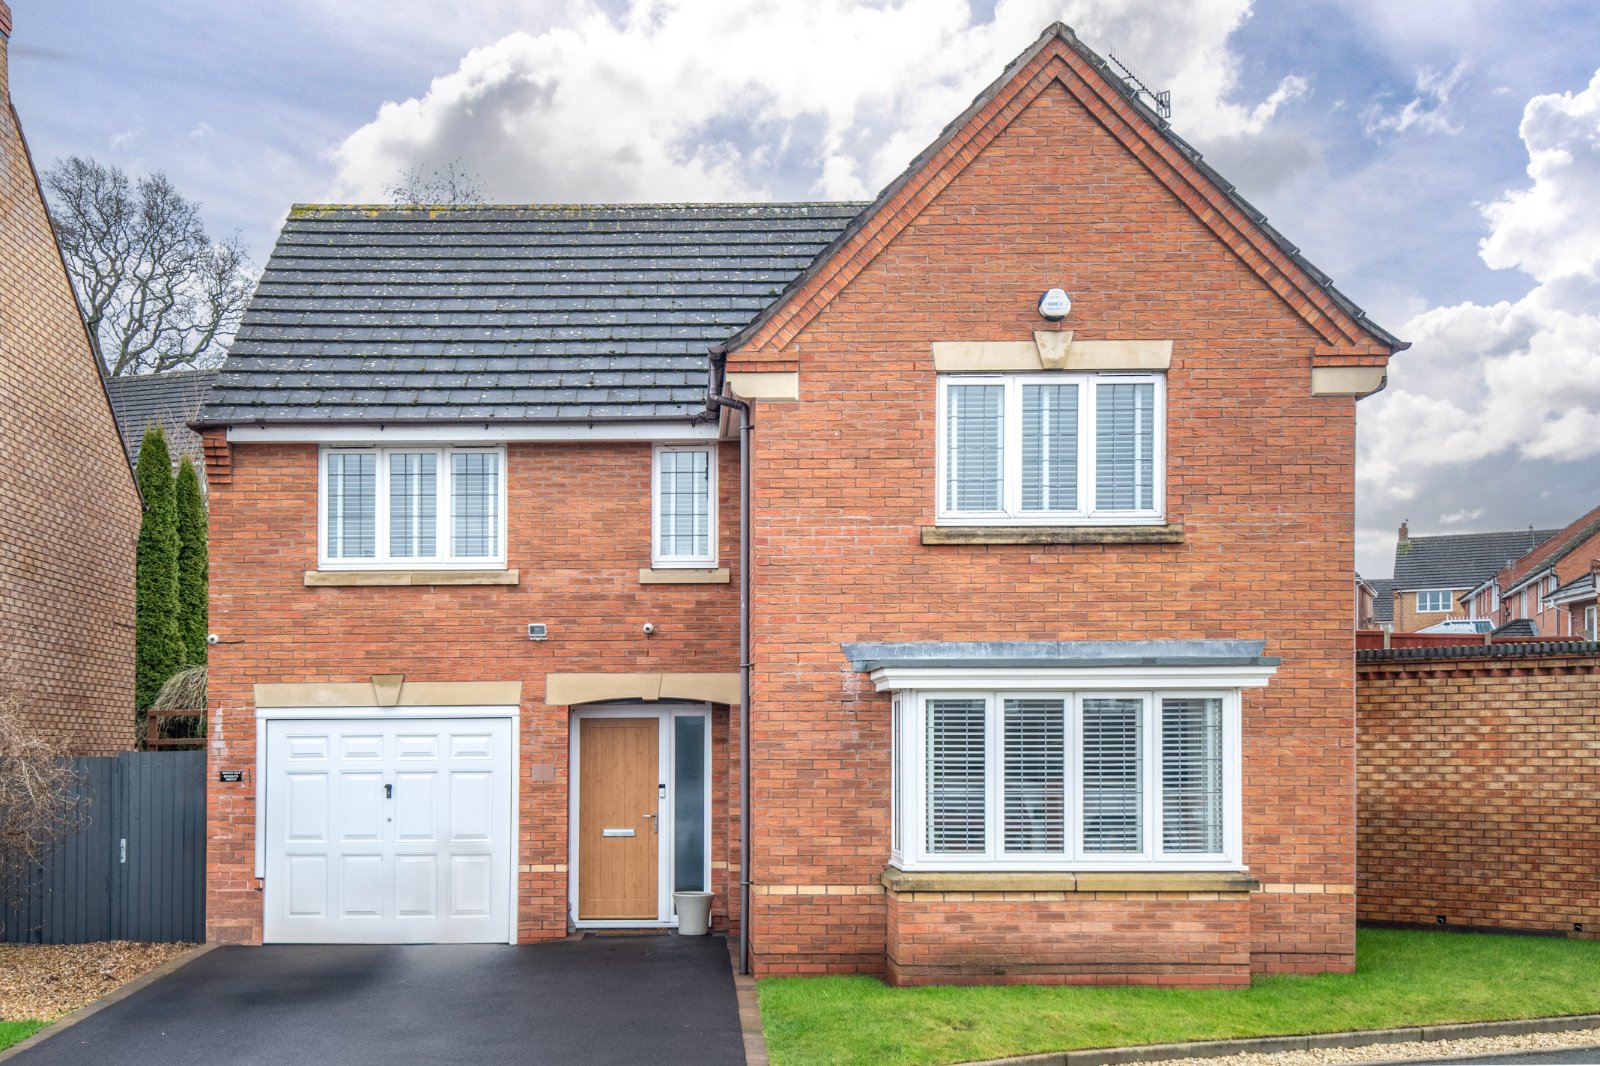 4 bed house for sale in Royal Worcester Crescent, Bromsgrove  - Property Image 1